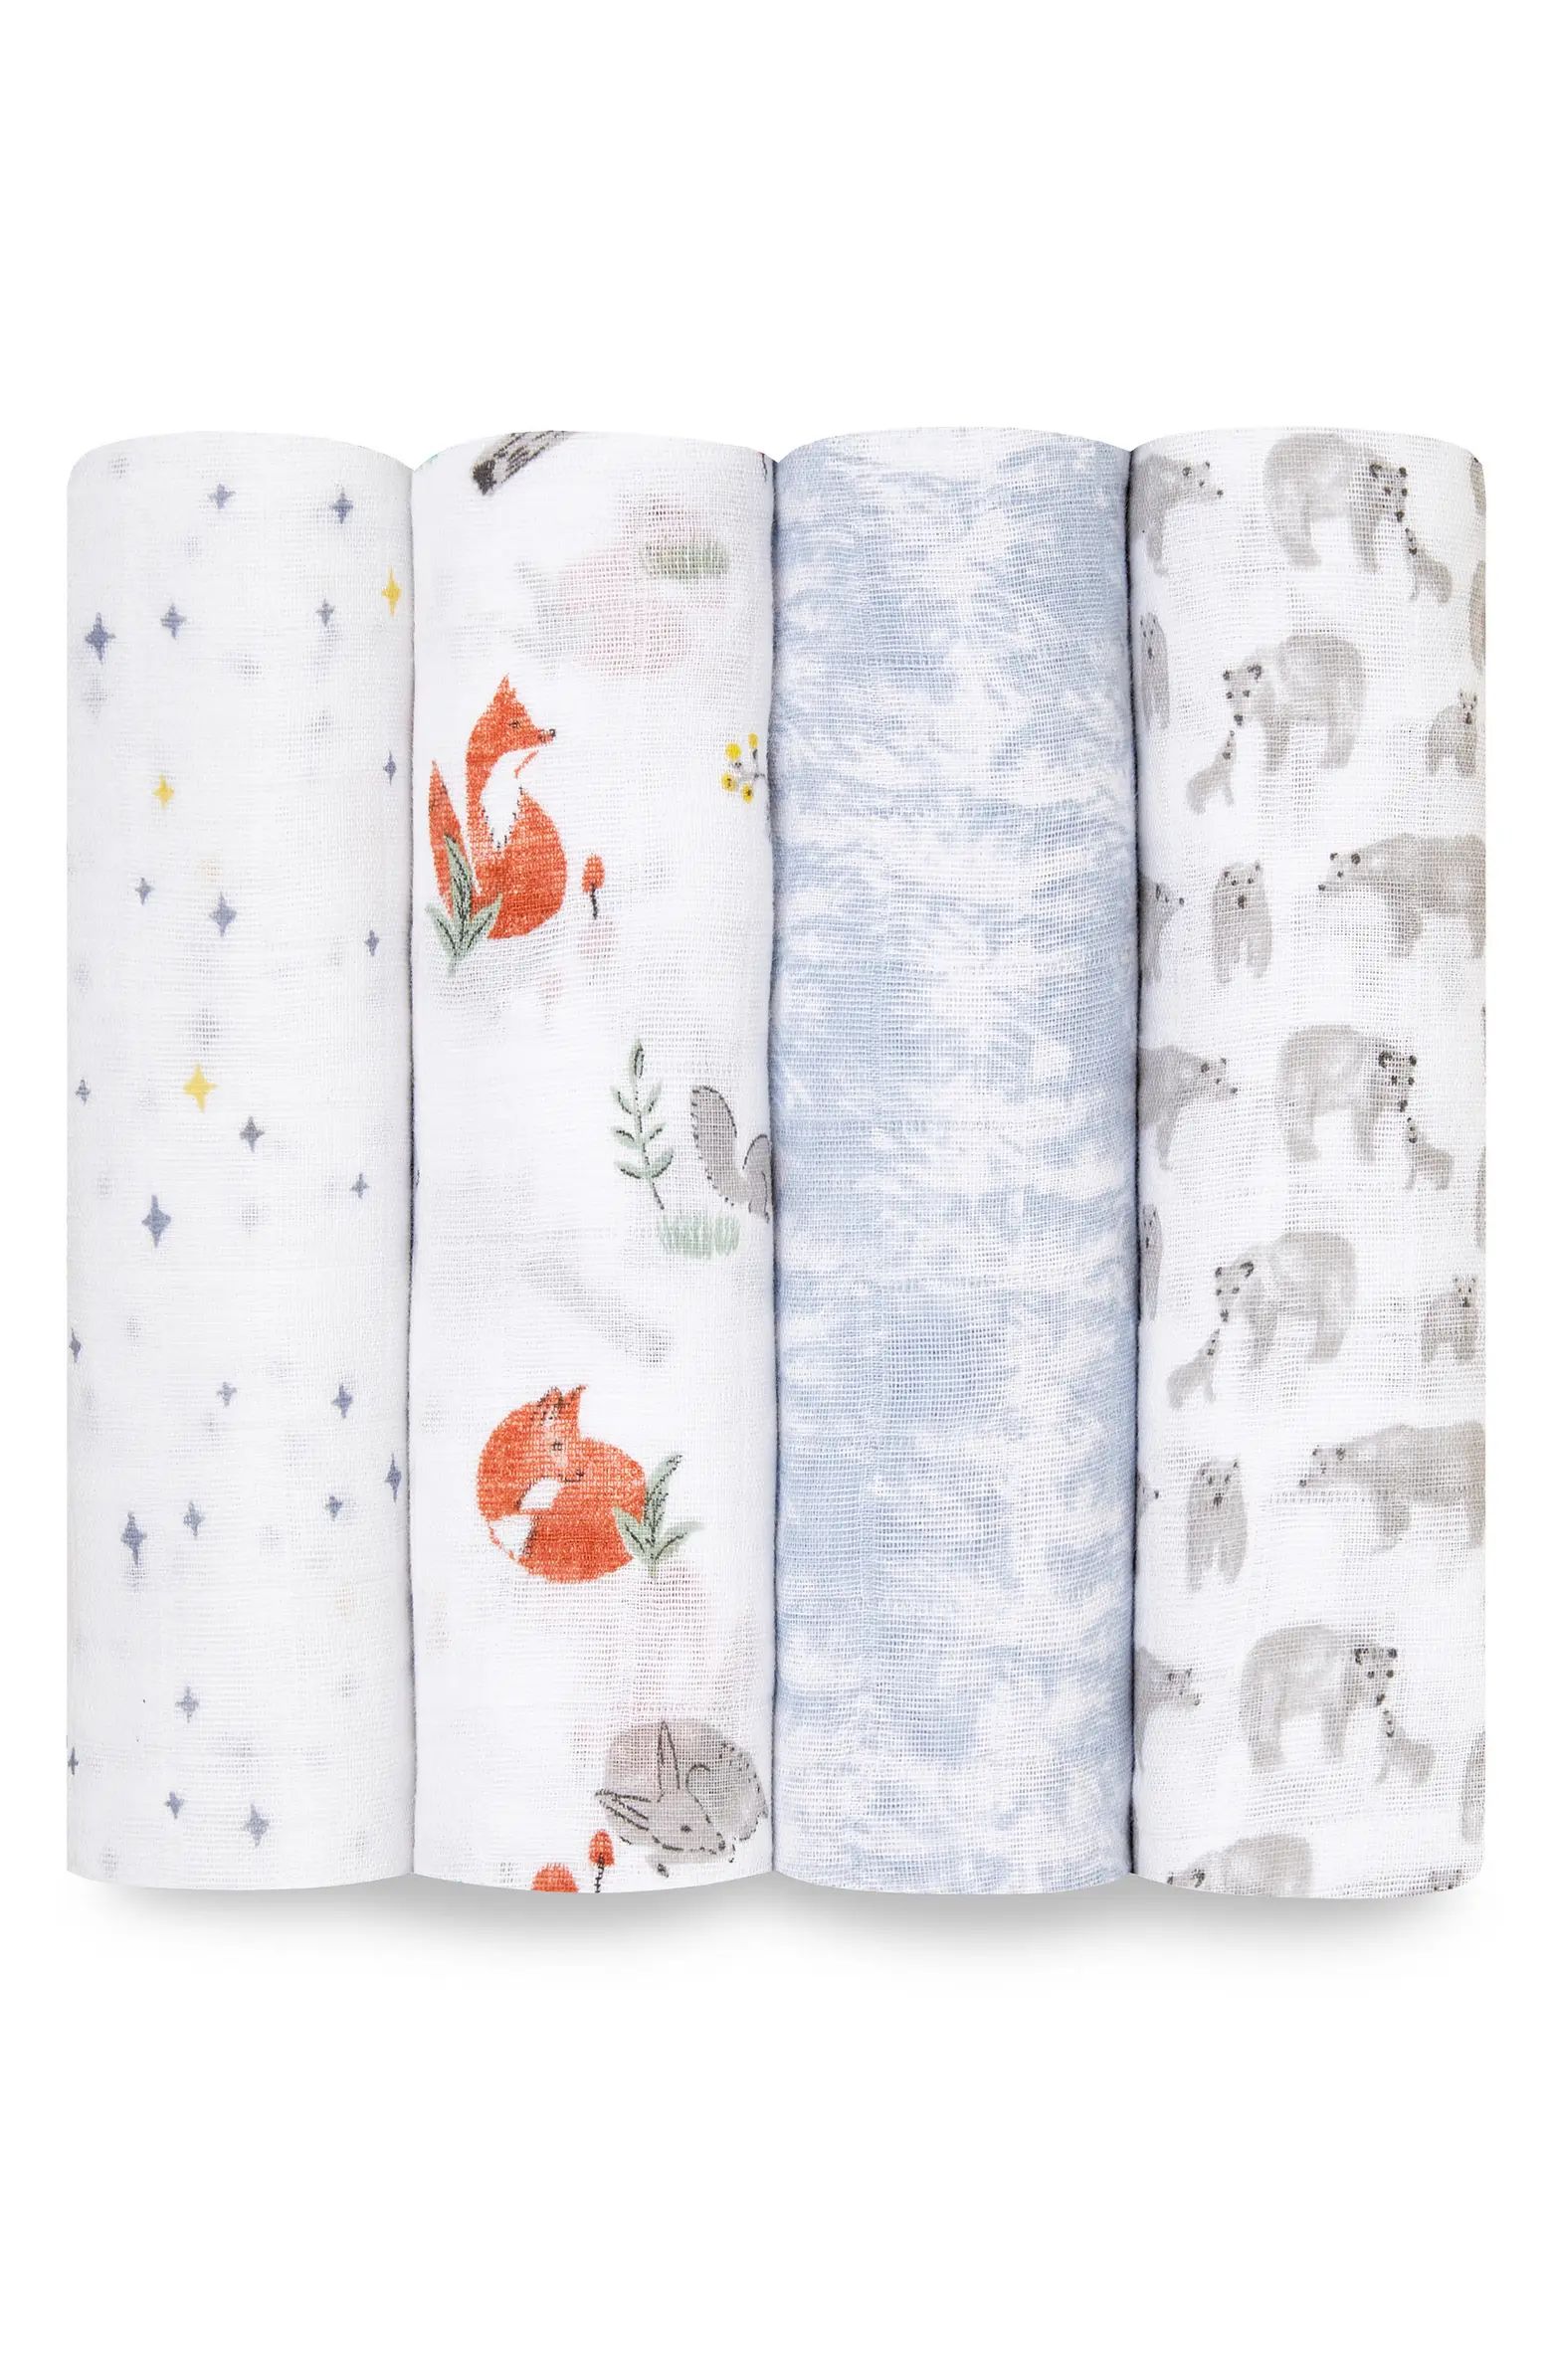 aden + anais Set of 4 Classic Swaddling Cloths | Nordstrom | Nordstrom